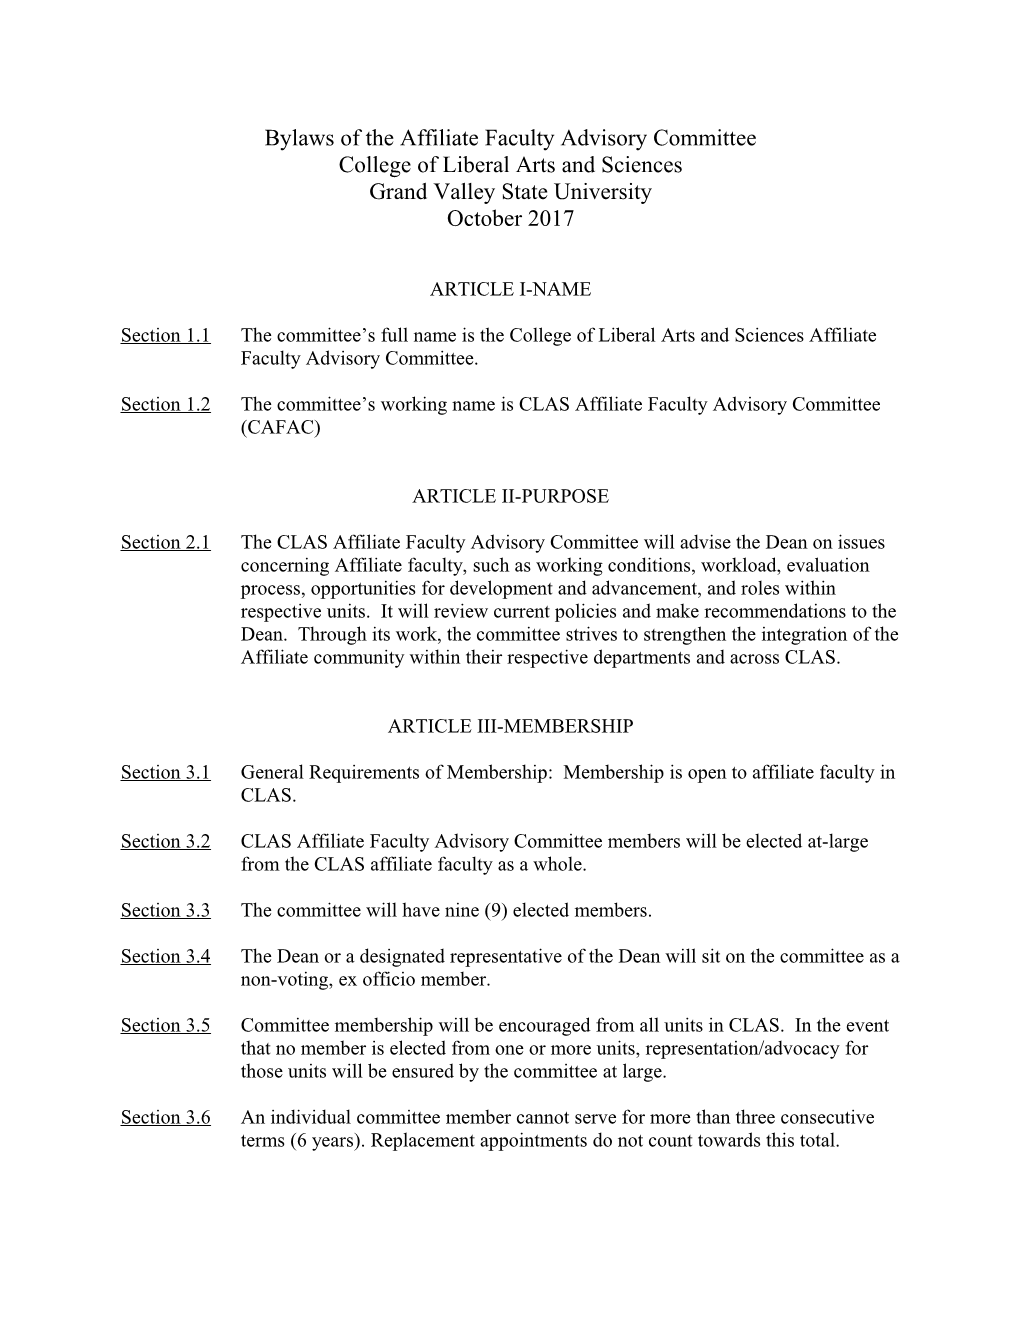 College of Liberal Arts and Sciences Faculty Development Committee BYLAWS